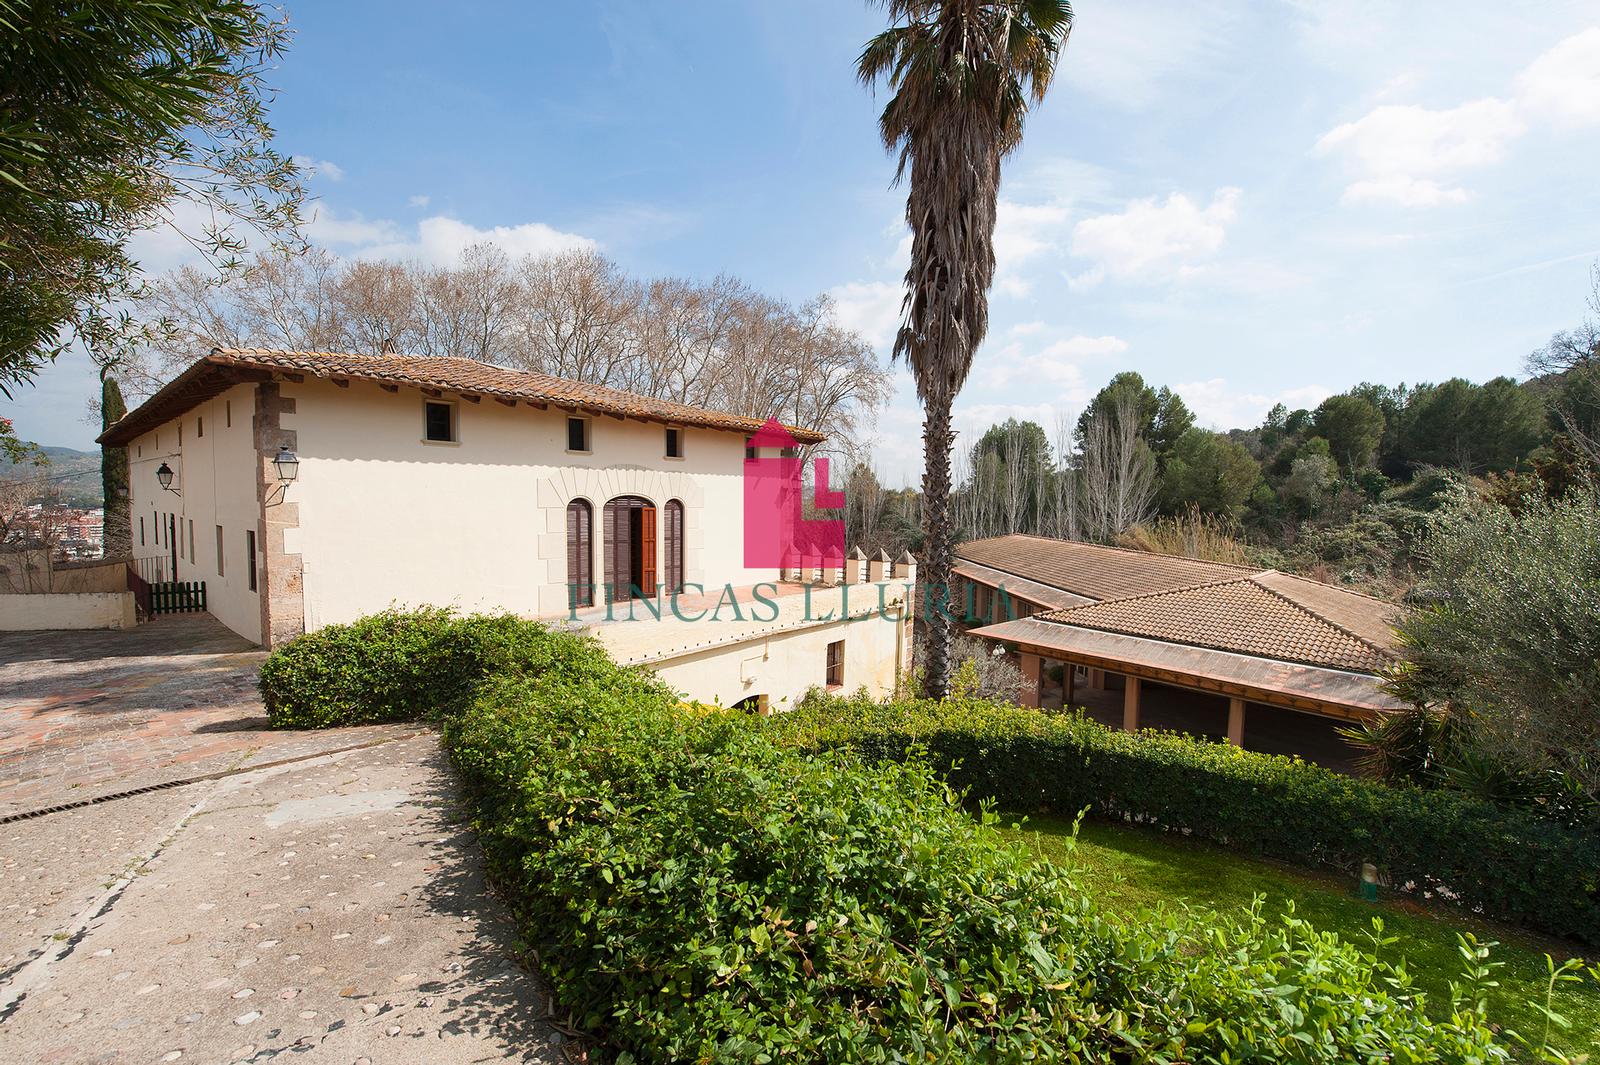 HOUSE WITH 3 FLOORS IN ESPARRAGUERA